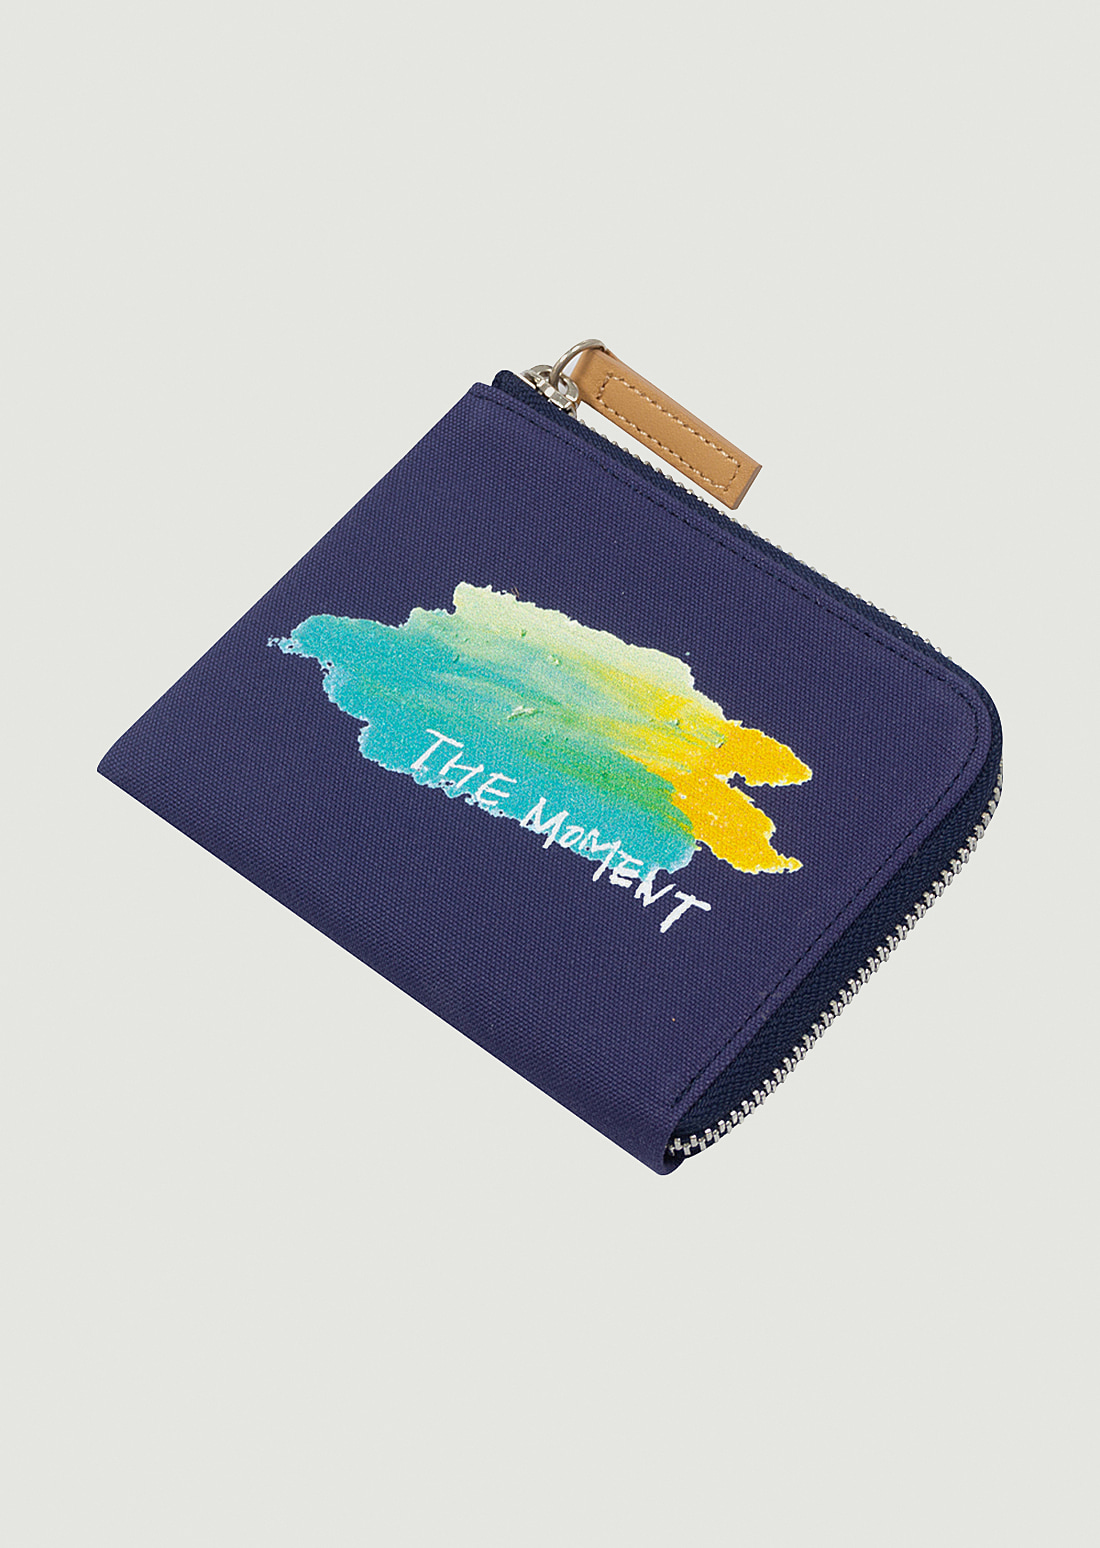 ’THE MOMENT’ Oxford Wallet (Navy)